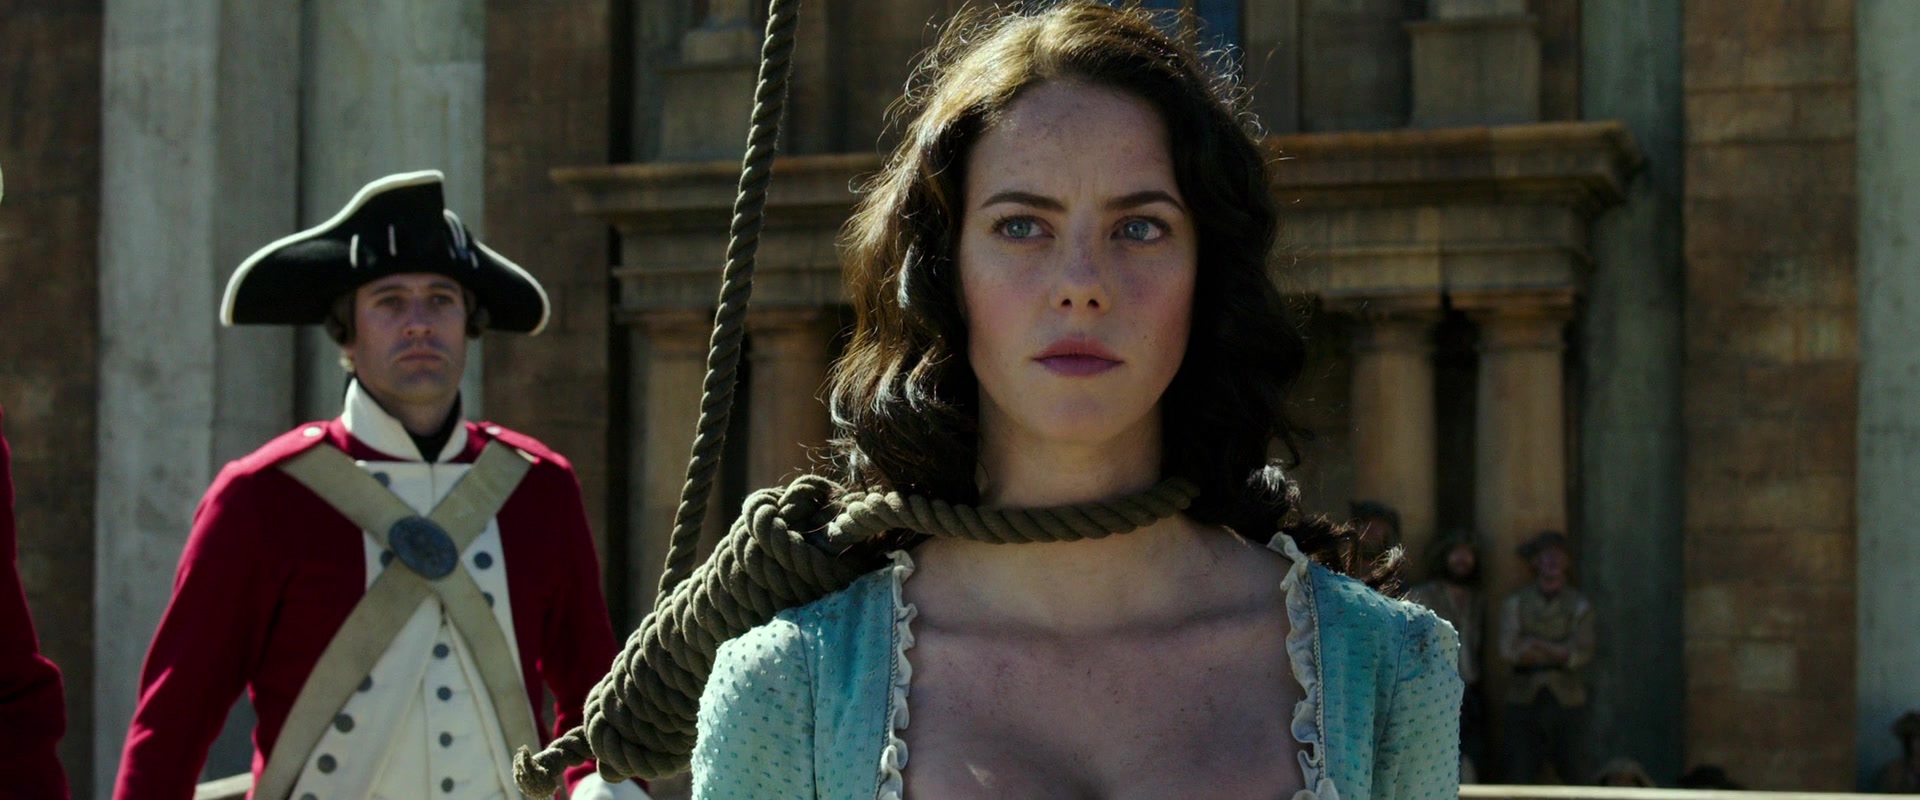 Carina Smyth Barbossa (Kaya Scodelario) is sentenced to hang for the crime of witchcraft in Elizabeth Swann (Keira Knightley) takes aim at the Kraken in Pirates of the Caribbean: Dead Men Tell No Tales (2017) via Blu-ray